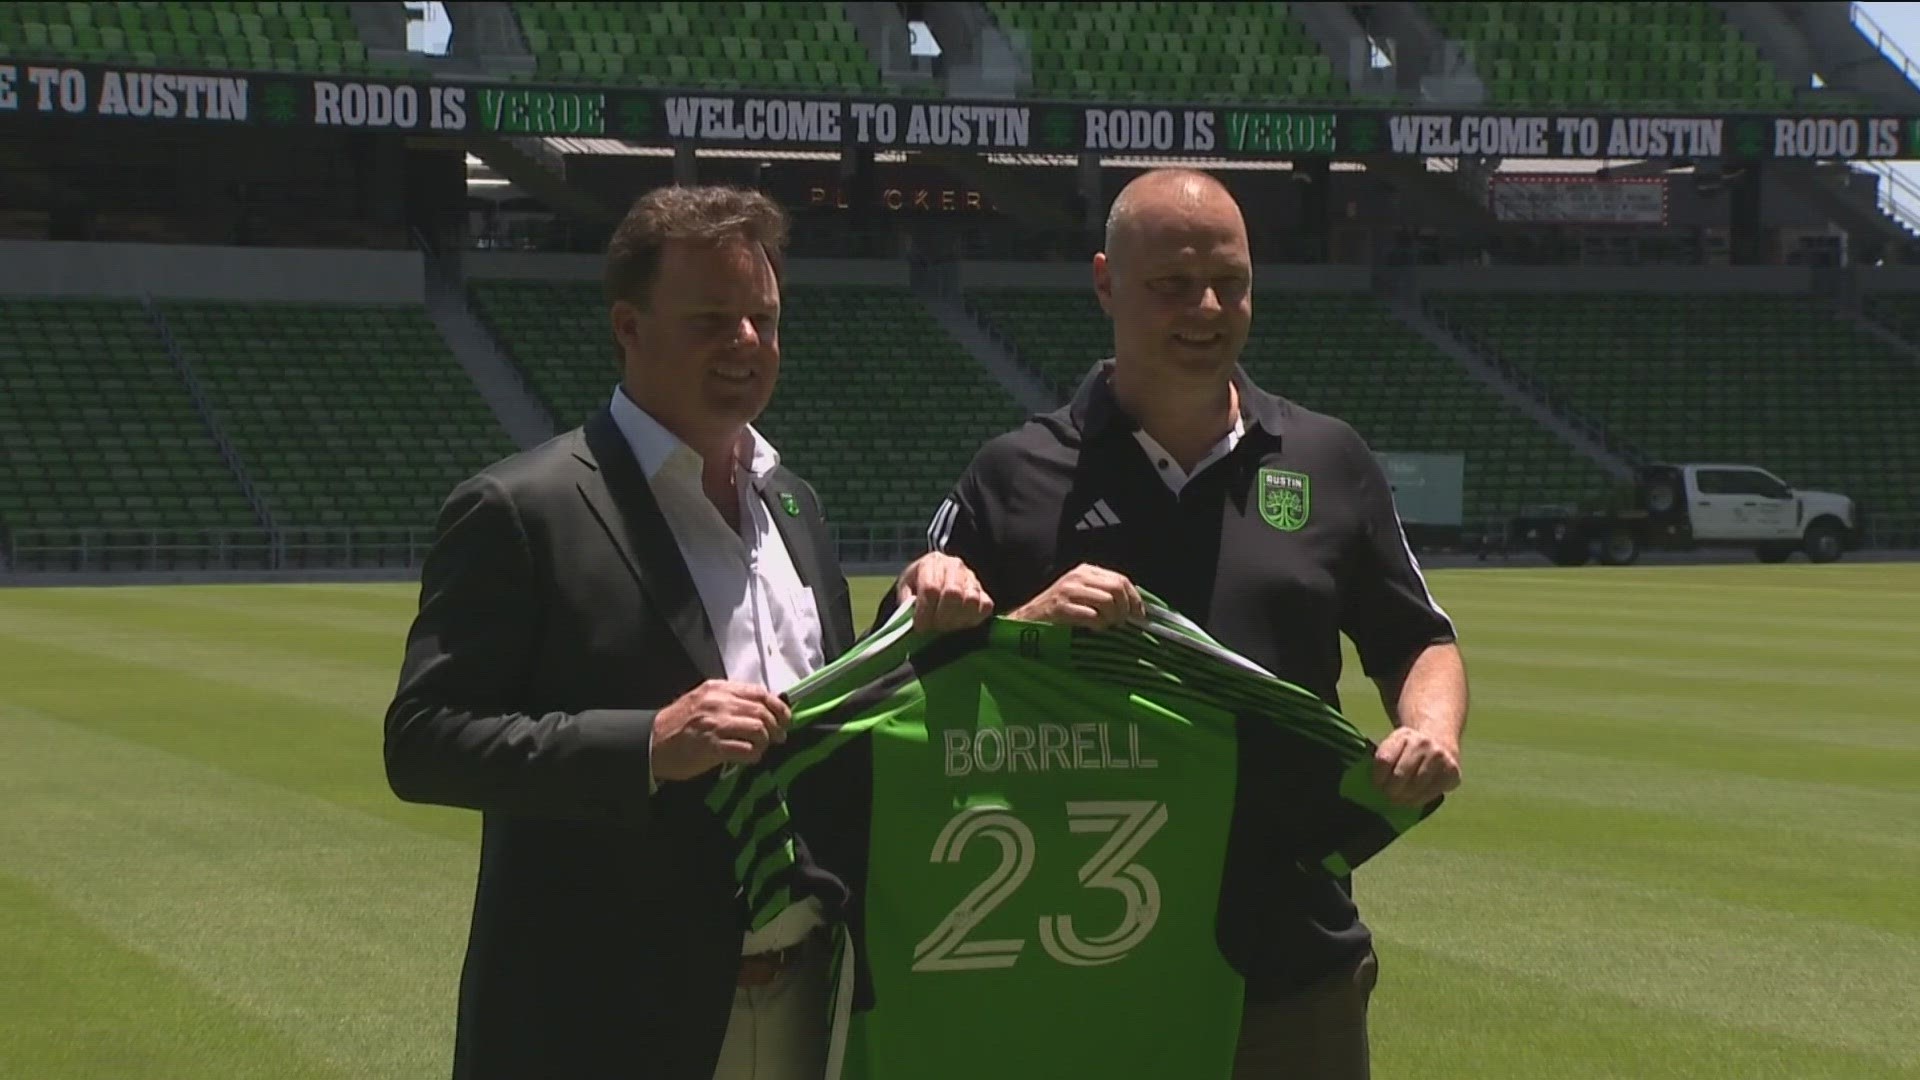 Austin FC's new sporting director met with KVUE for the first time on Monday. Rodolfo Borrell comes to Austin following a distinguished career overseas.